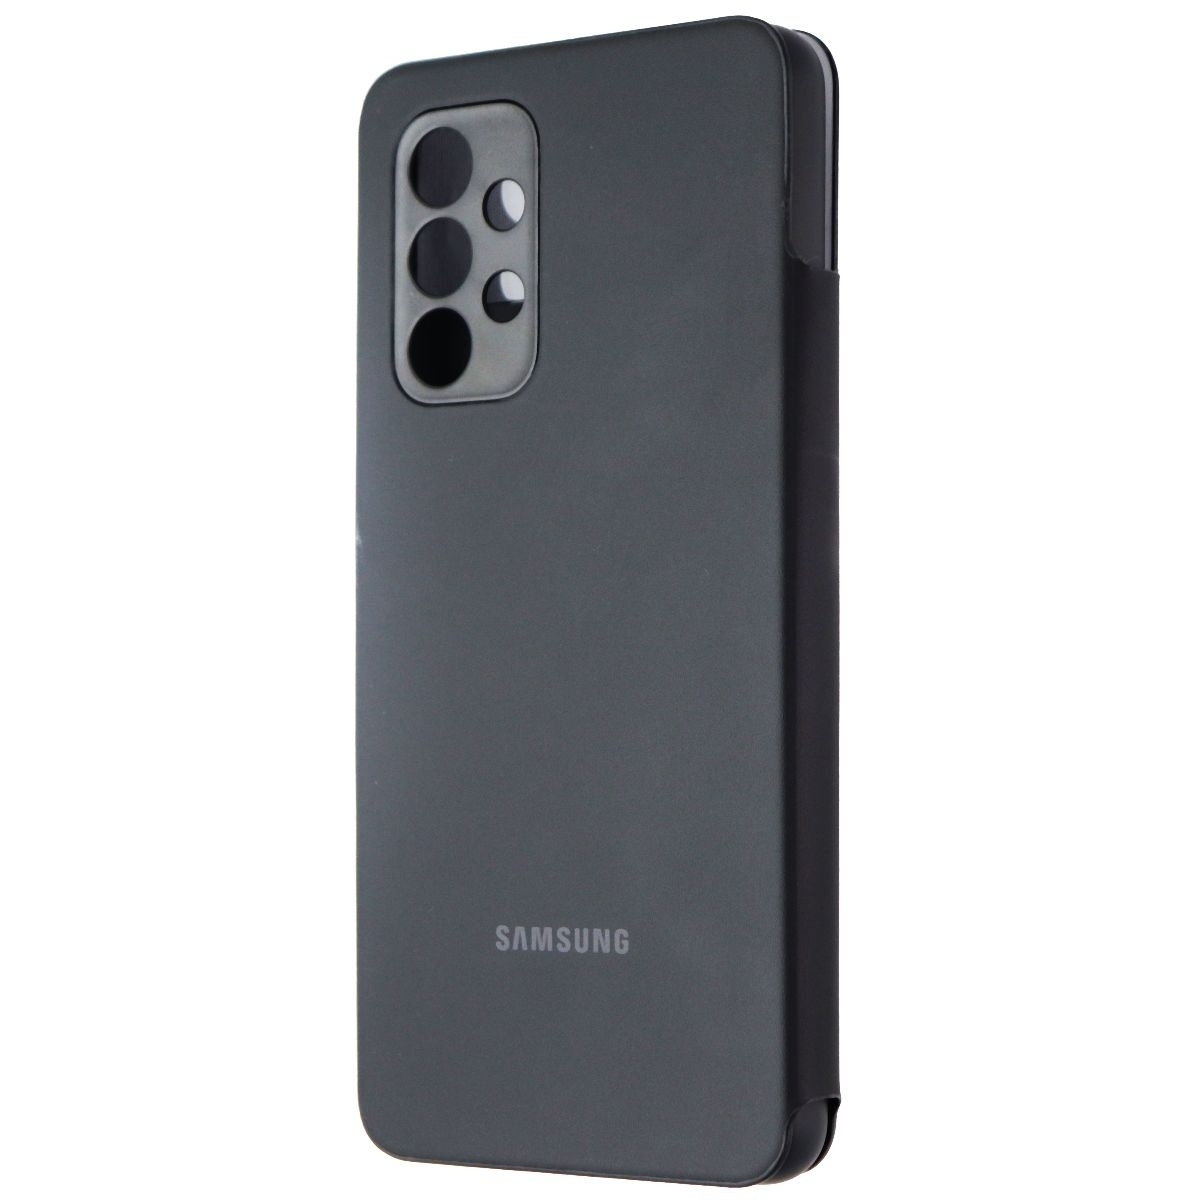 Samsung Smart S View Wallet Cover For Samsung Galaxy A53 5G - Black